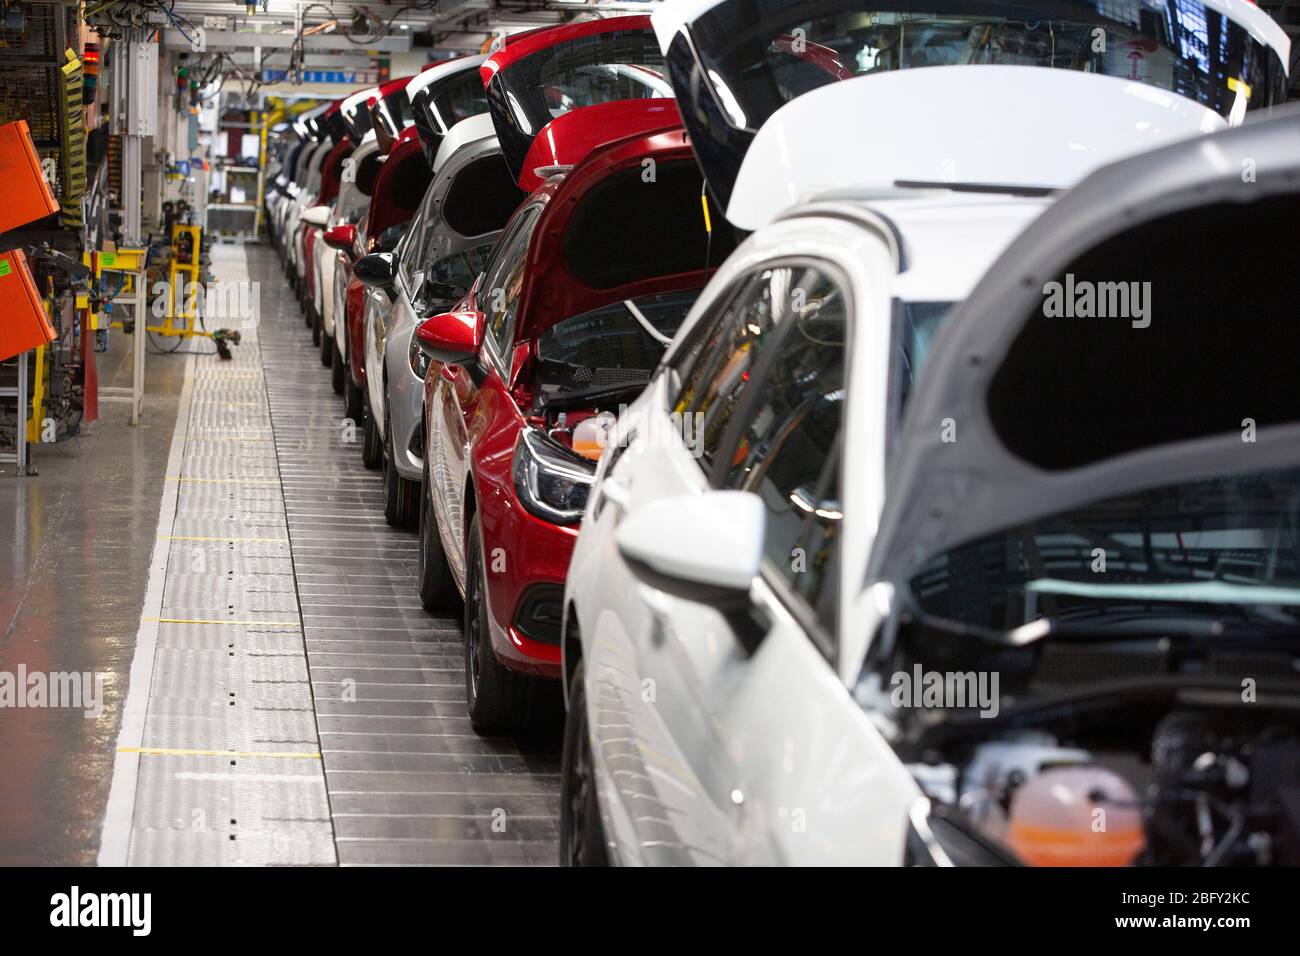 A line of cars on a car assembly line at the Vauxhall car factory during preparedness tests and redesign ahead of re-opening following the COVID-19 outbreak. Located in Ellesmere Port, Wirral, the factory opened in 1962 and currently employs around 1100 workers. It ceased production on 17 March 2020 and will only resume work upon the advice of the UK Government, which will involve stringent physical distancing measures being in place across the site. Stock Photo